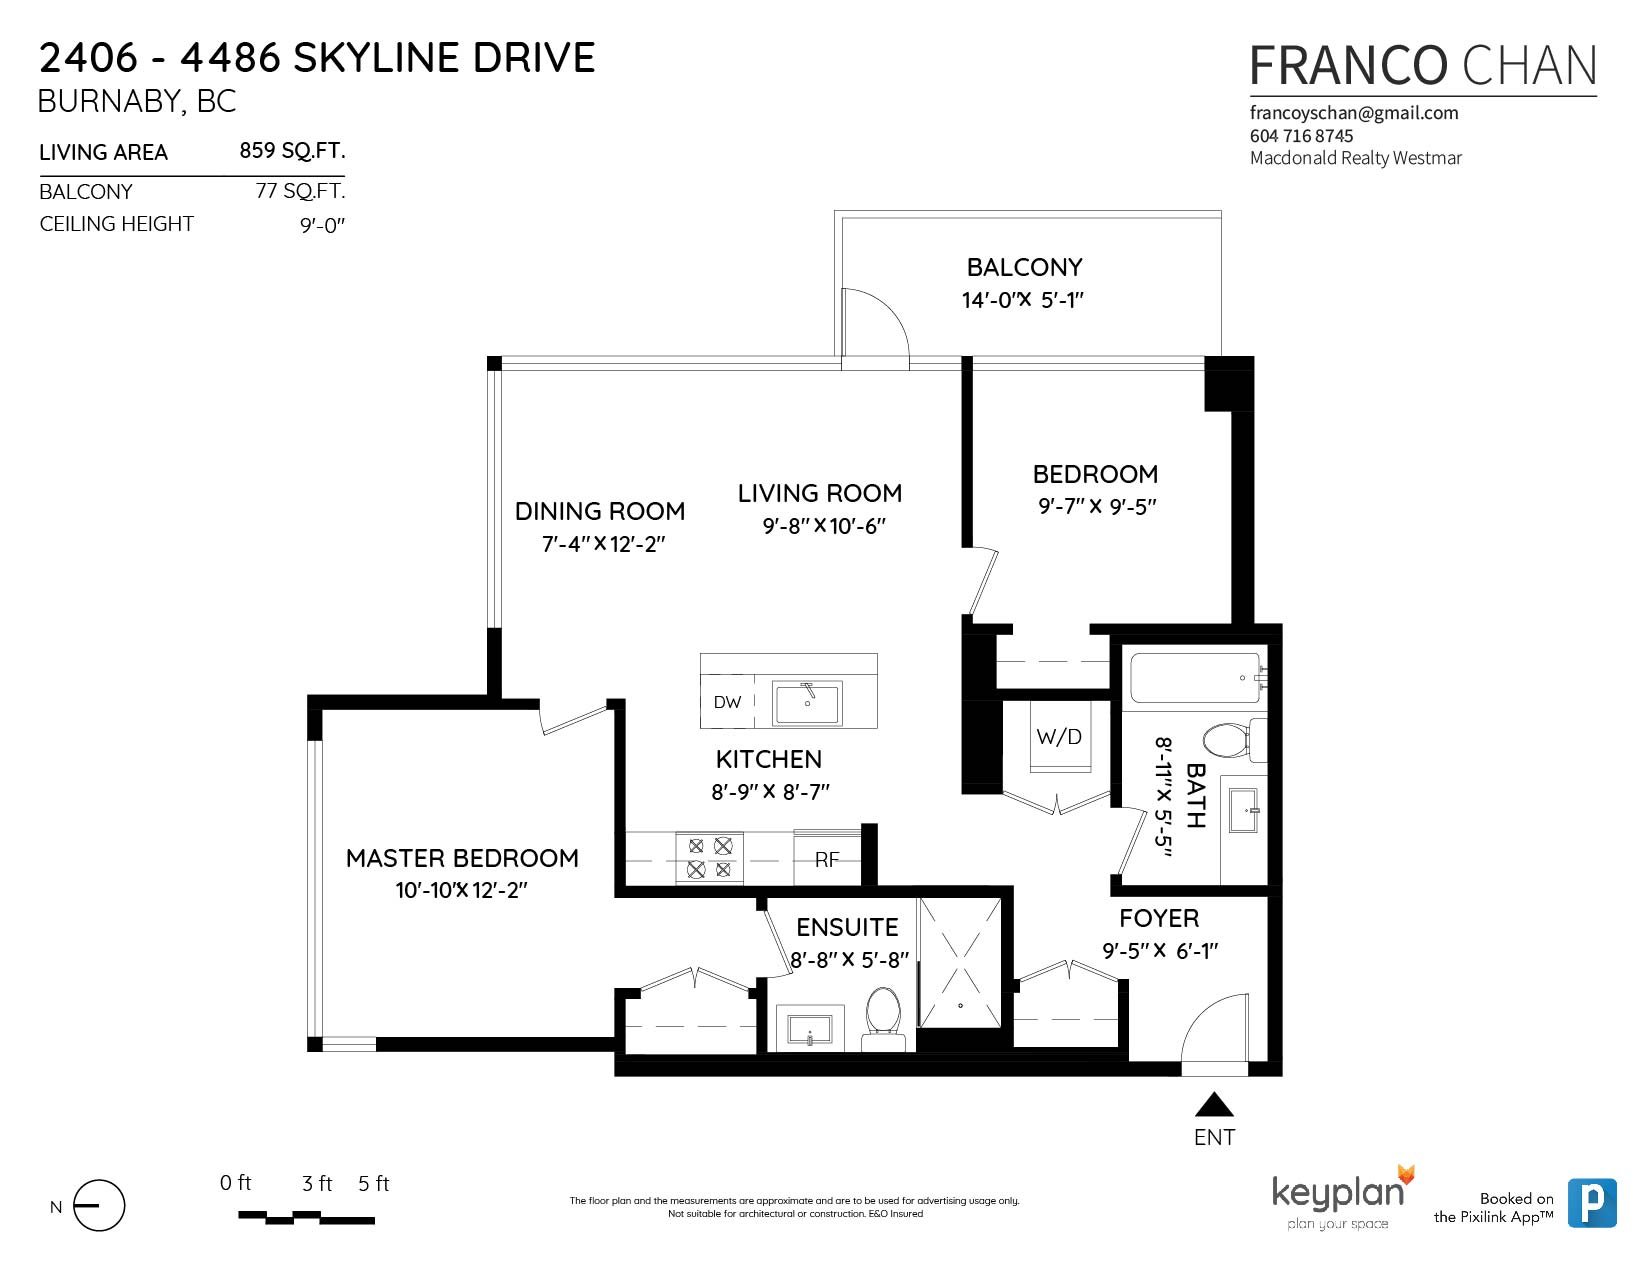 2406 - 4485 Skyline Drive, Burnaby - Floor Plan - SOLD by Franco Chan